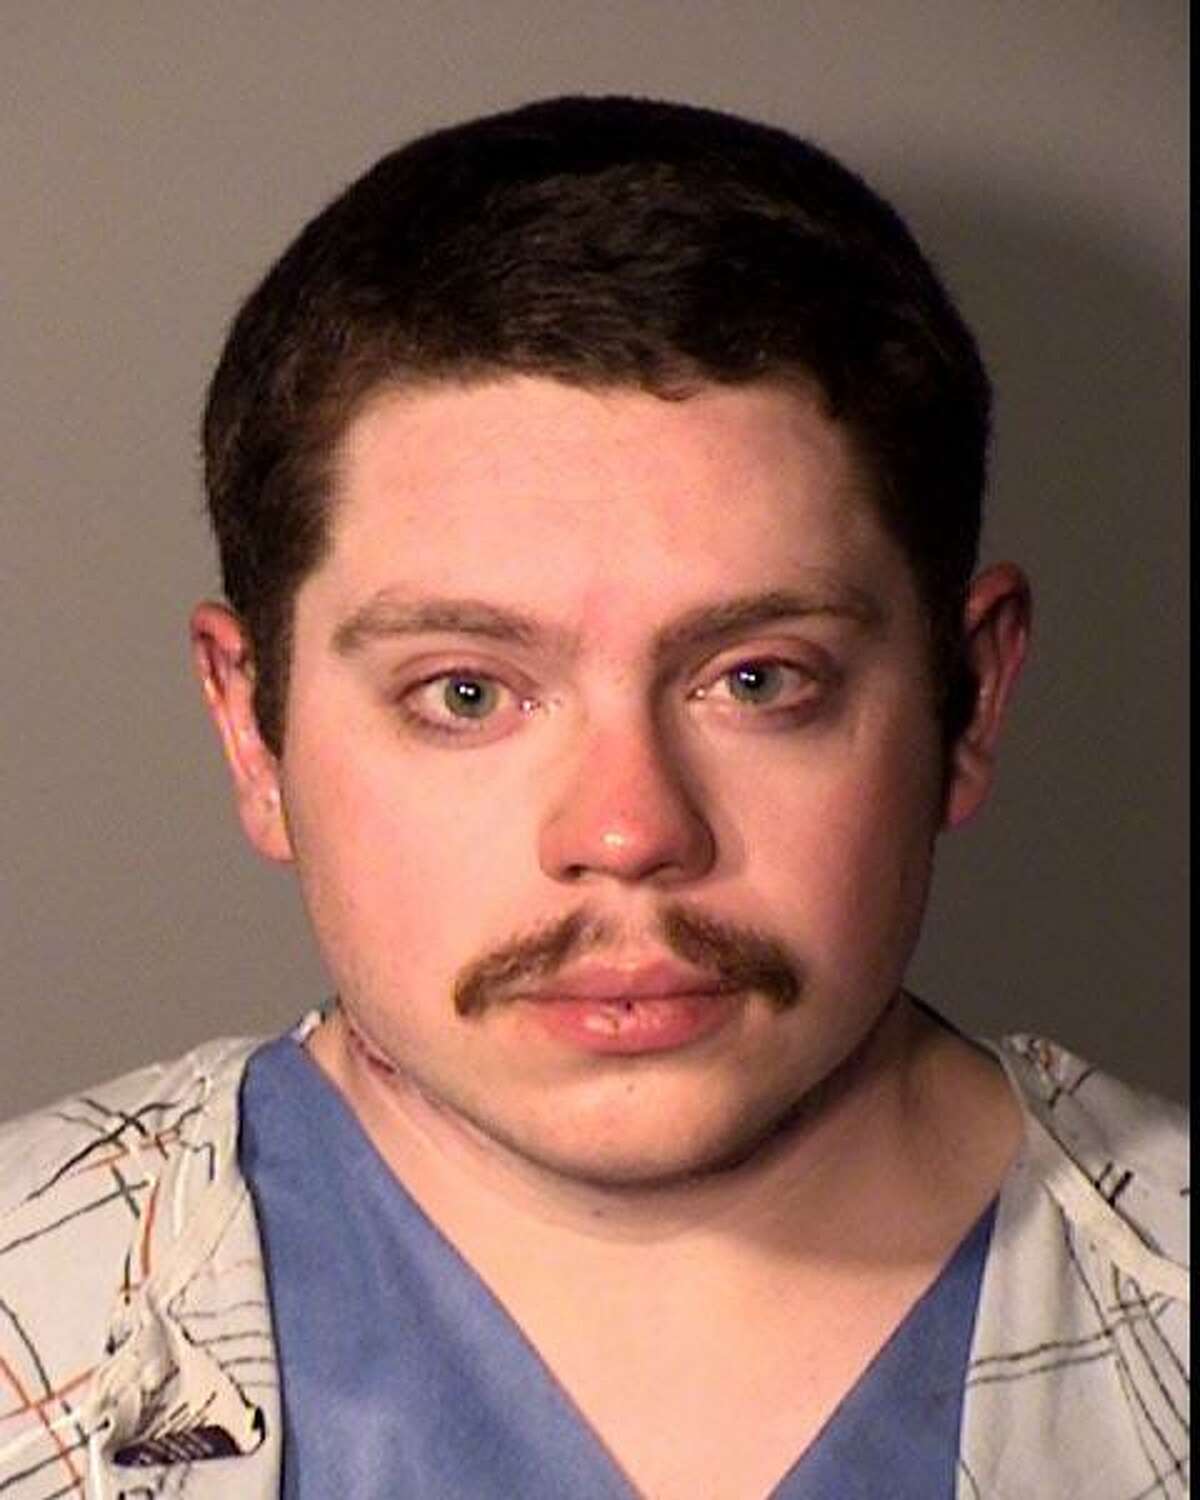 George Dodson, 23, is facing murder and arson charges, after police say he killed his 22-year-old wife and set their New London home ablaze with their 1-year-old infant inside.